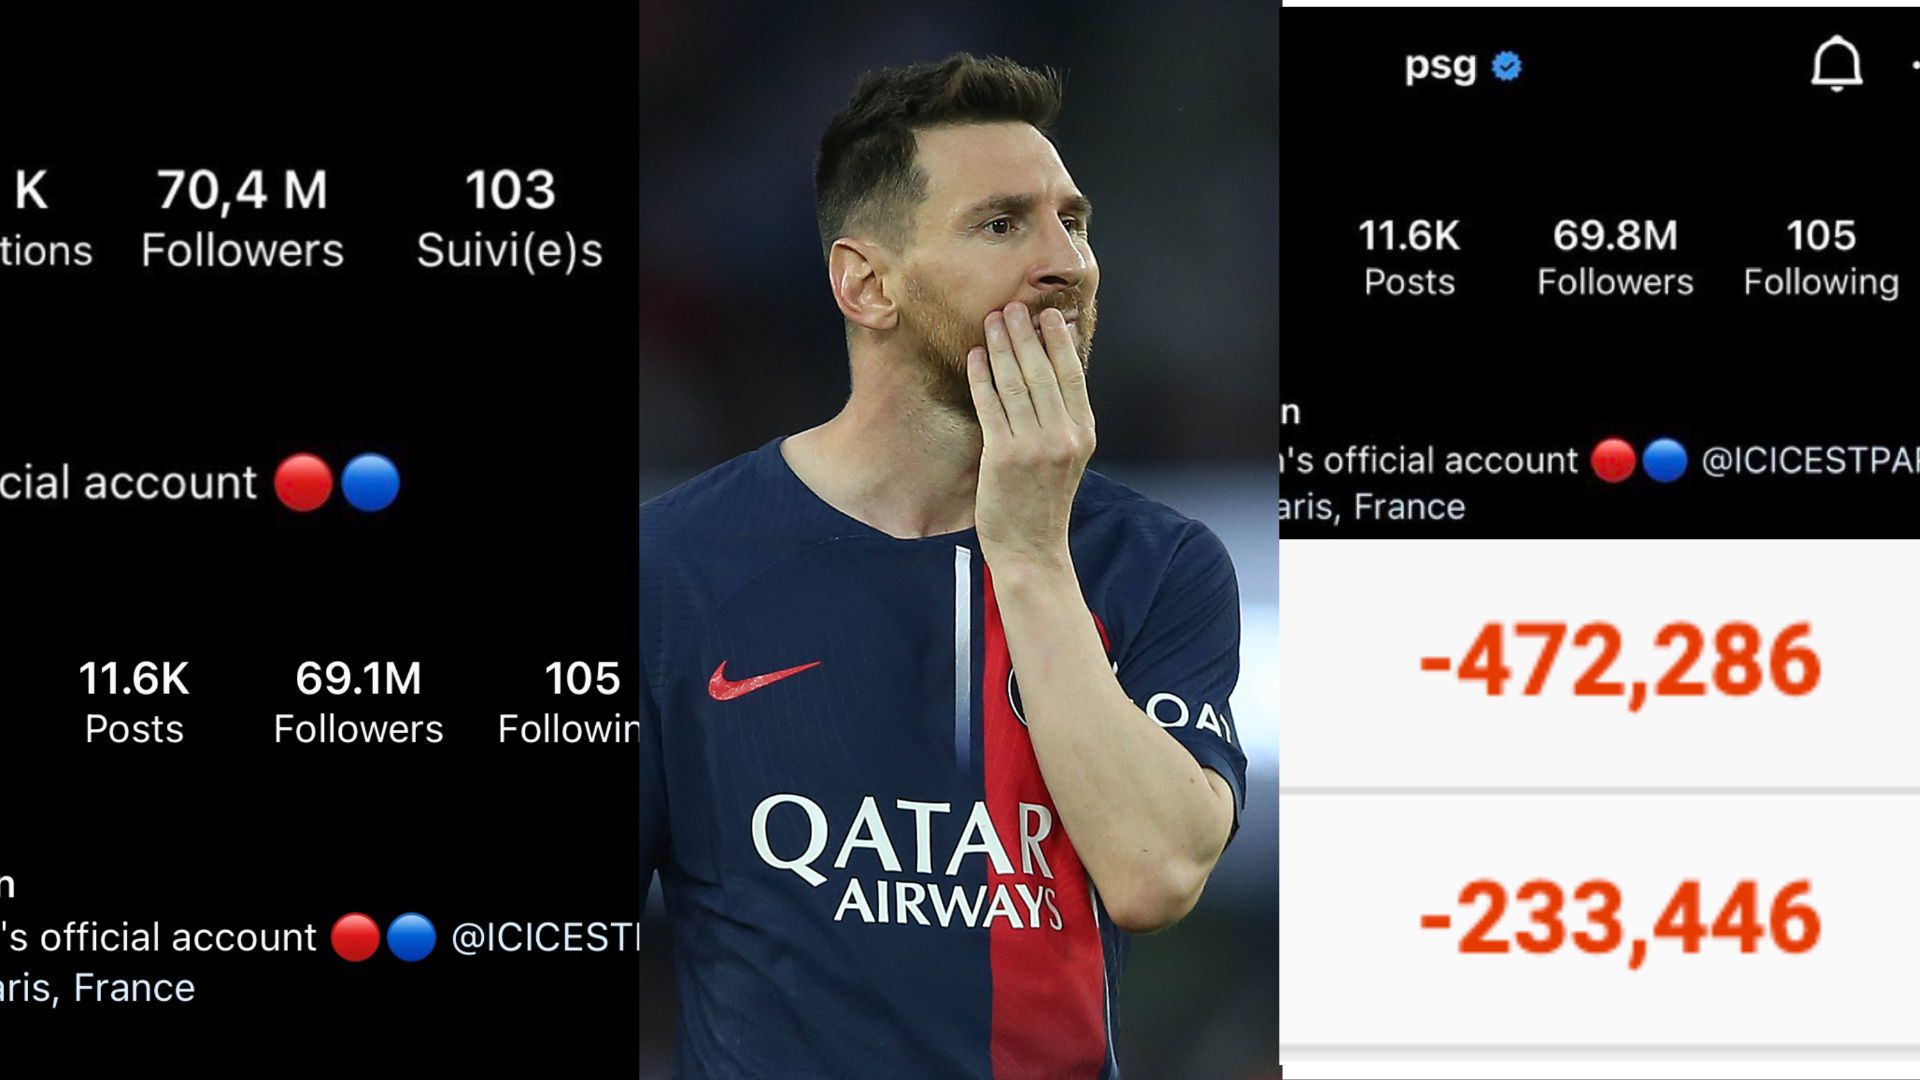 Lionel Messi: PSG lose over 1 Million Instagram followers after